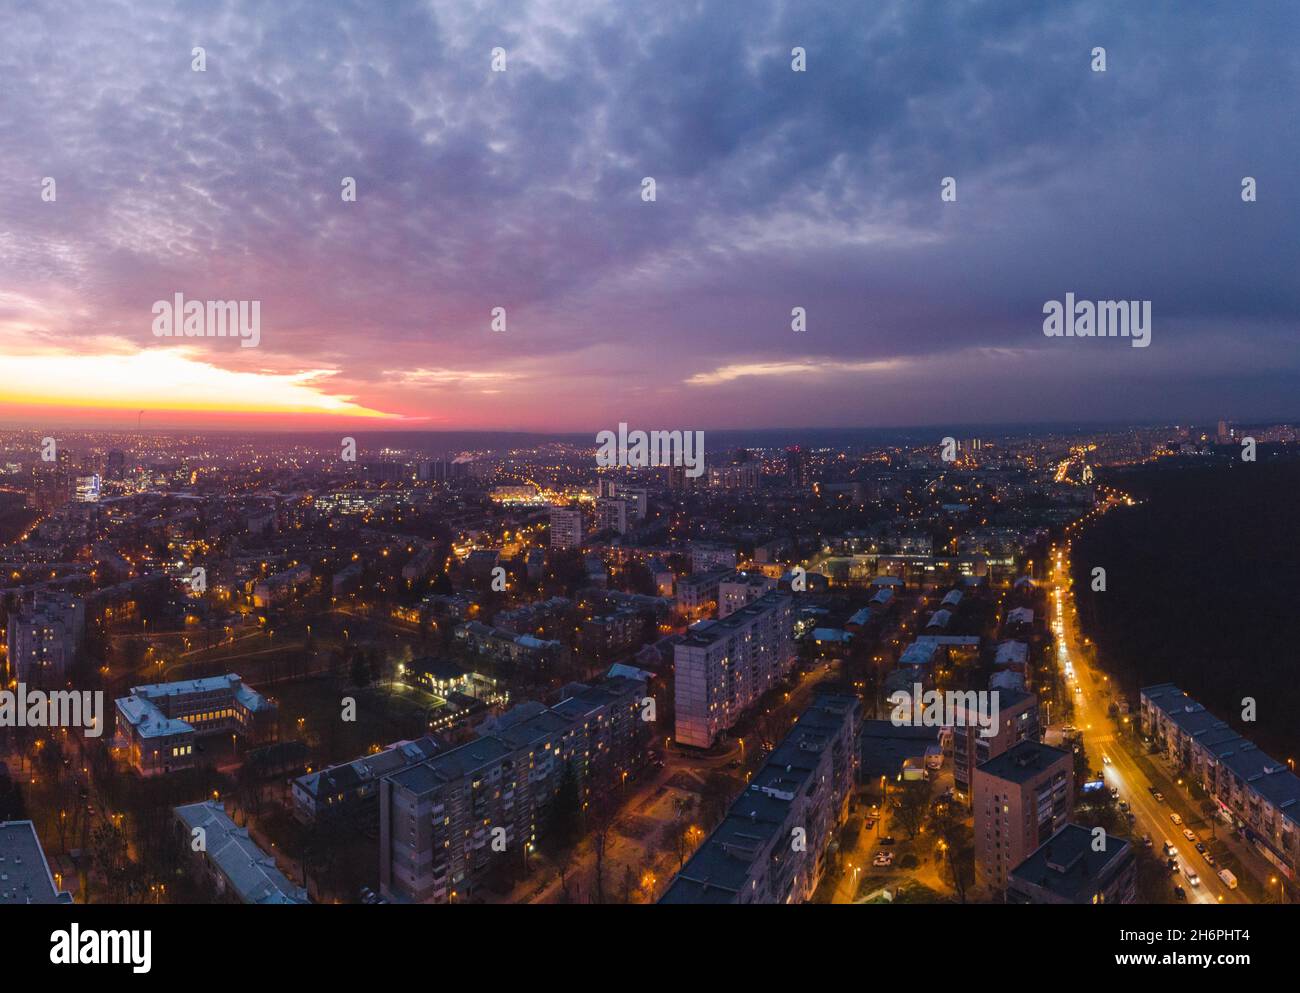 Aerial sunset scenic vibrant view on Kharkiv city, Pavlove pole. Night lights on streets of residential district and scenic cloudy purple sky after su Stock Photo